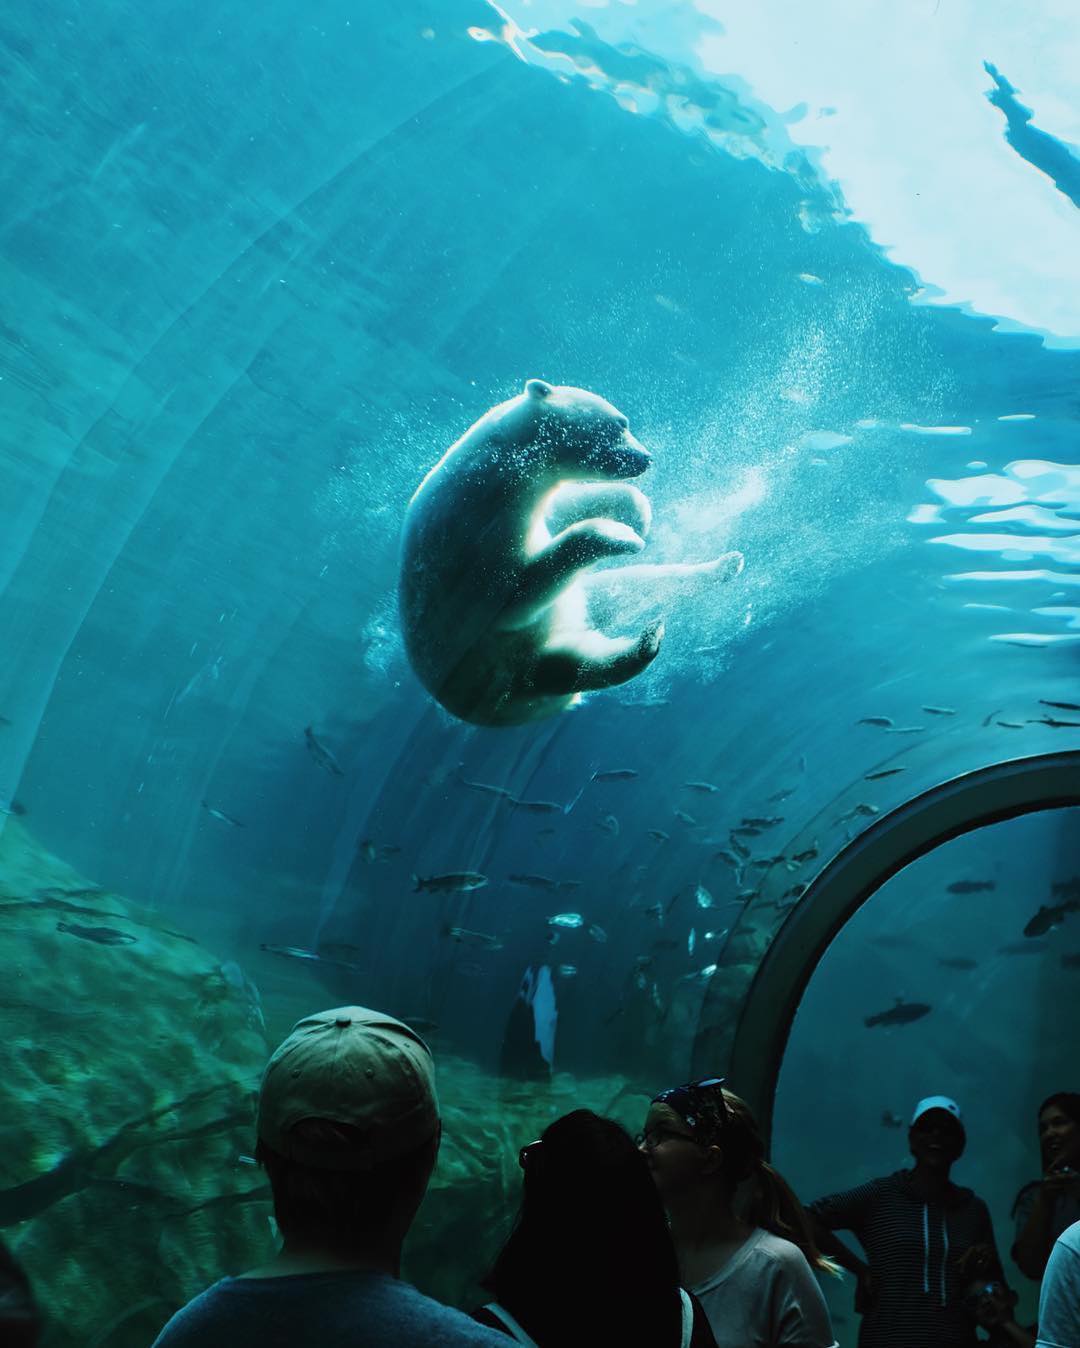 Polar bear swims in aquarium while people watch from below. Photo by Instagram user @onlyincdbus